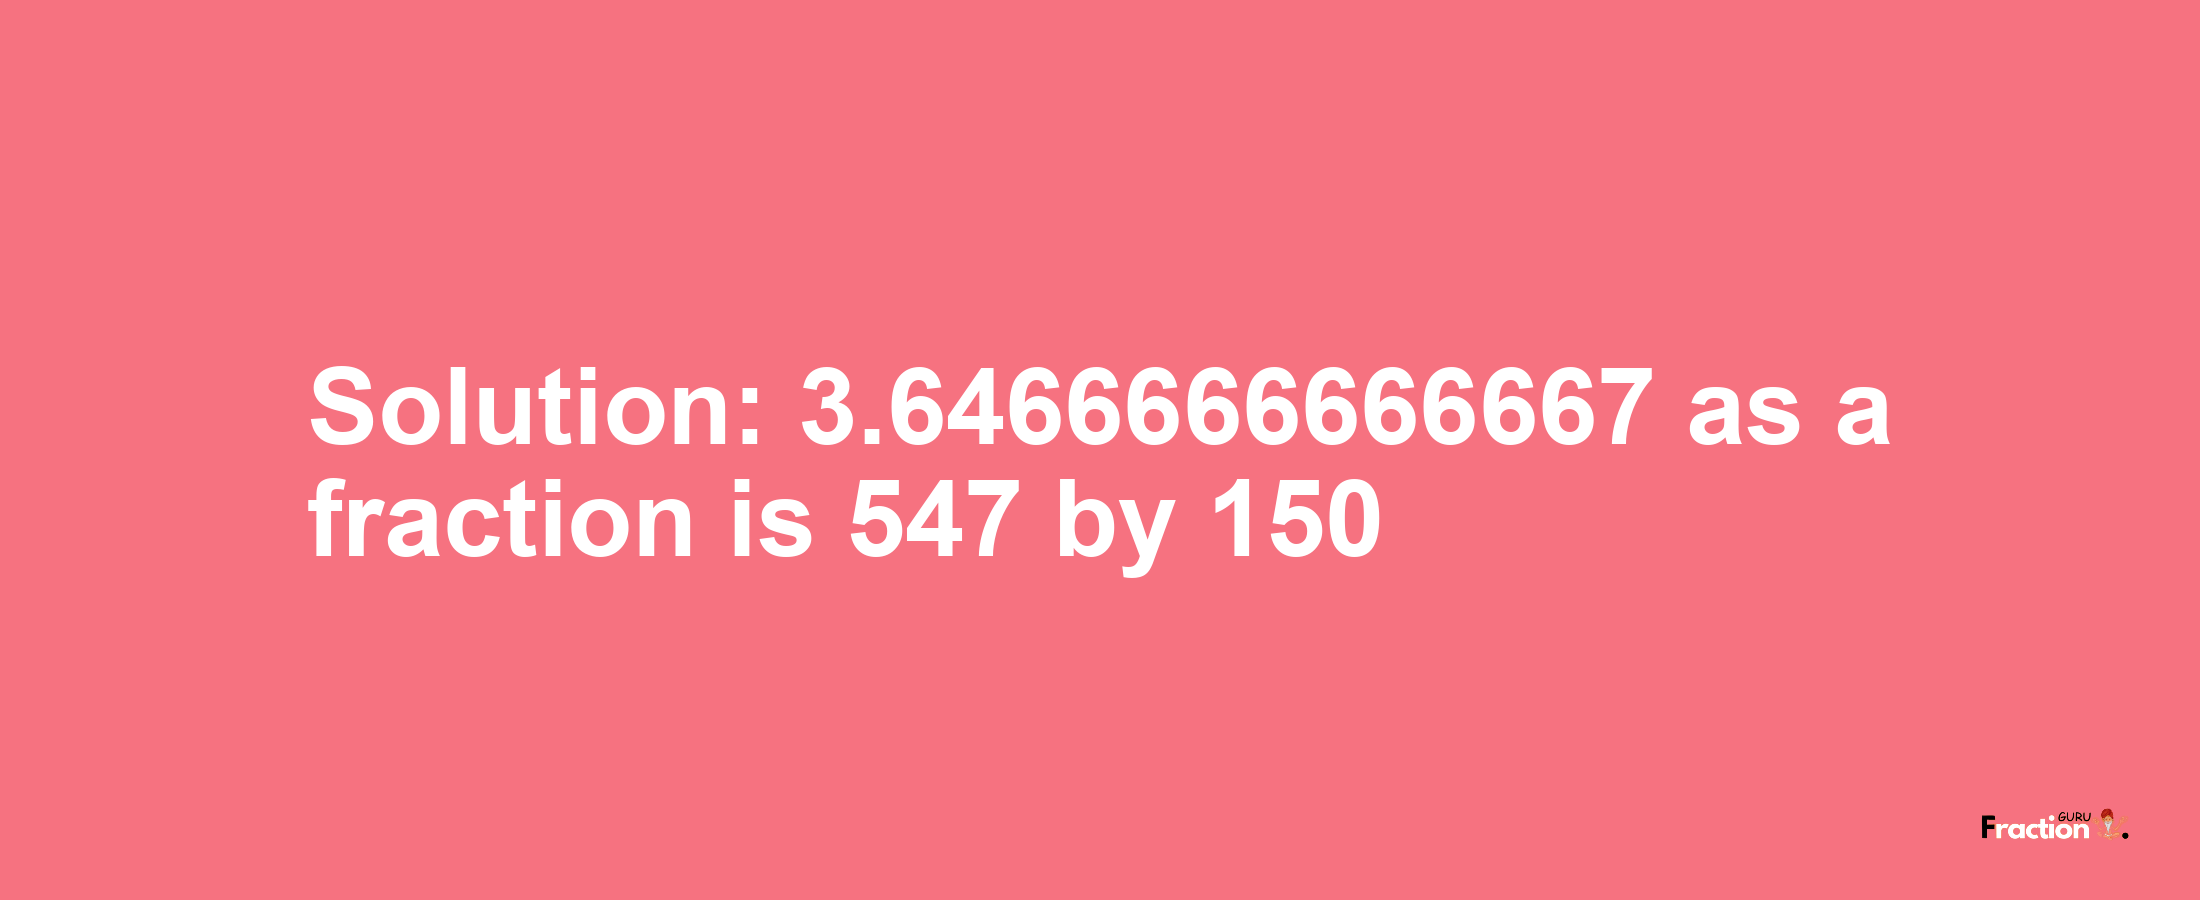 Solution:3.6466666666667 as a fraction is 547/150